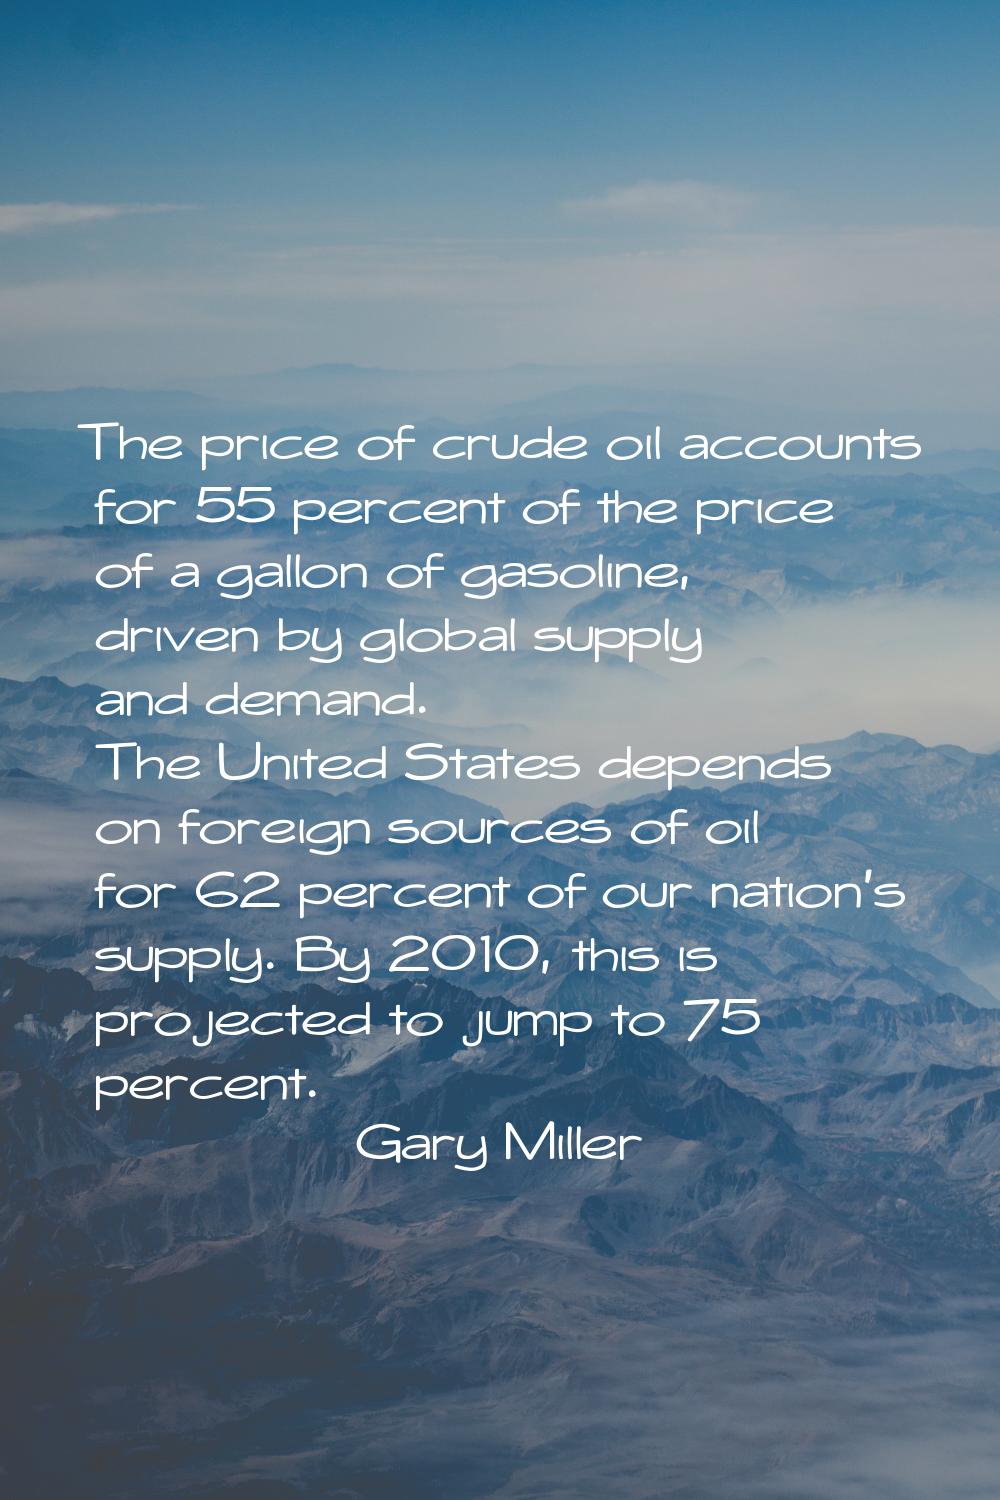 The price of crude oil accounts for 55 percent of the price of a gallon of gasoline, driven by glob